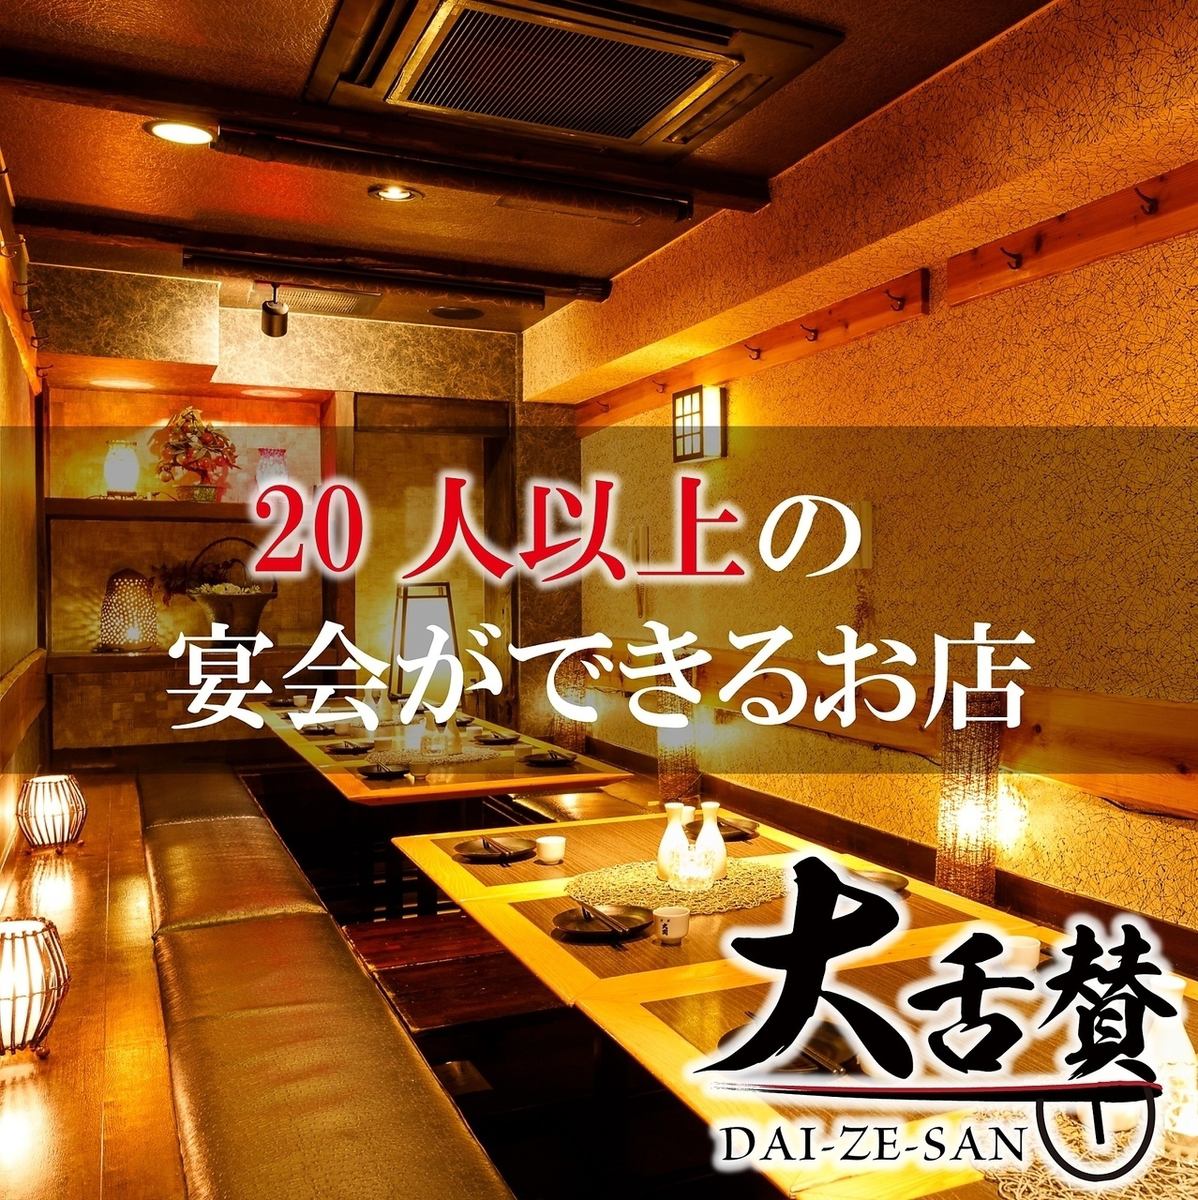 All-you-can-drink for 2.5 hours on the day for 980 yen. Definitely a great deal now!! [5x bonus points]